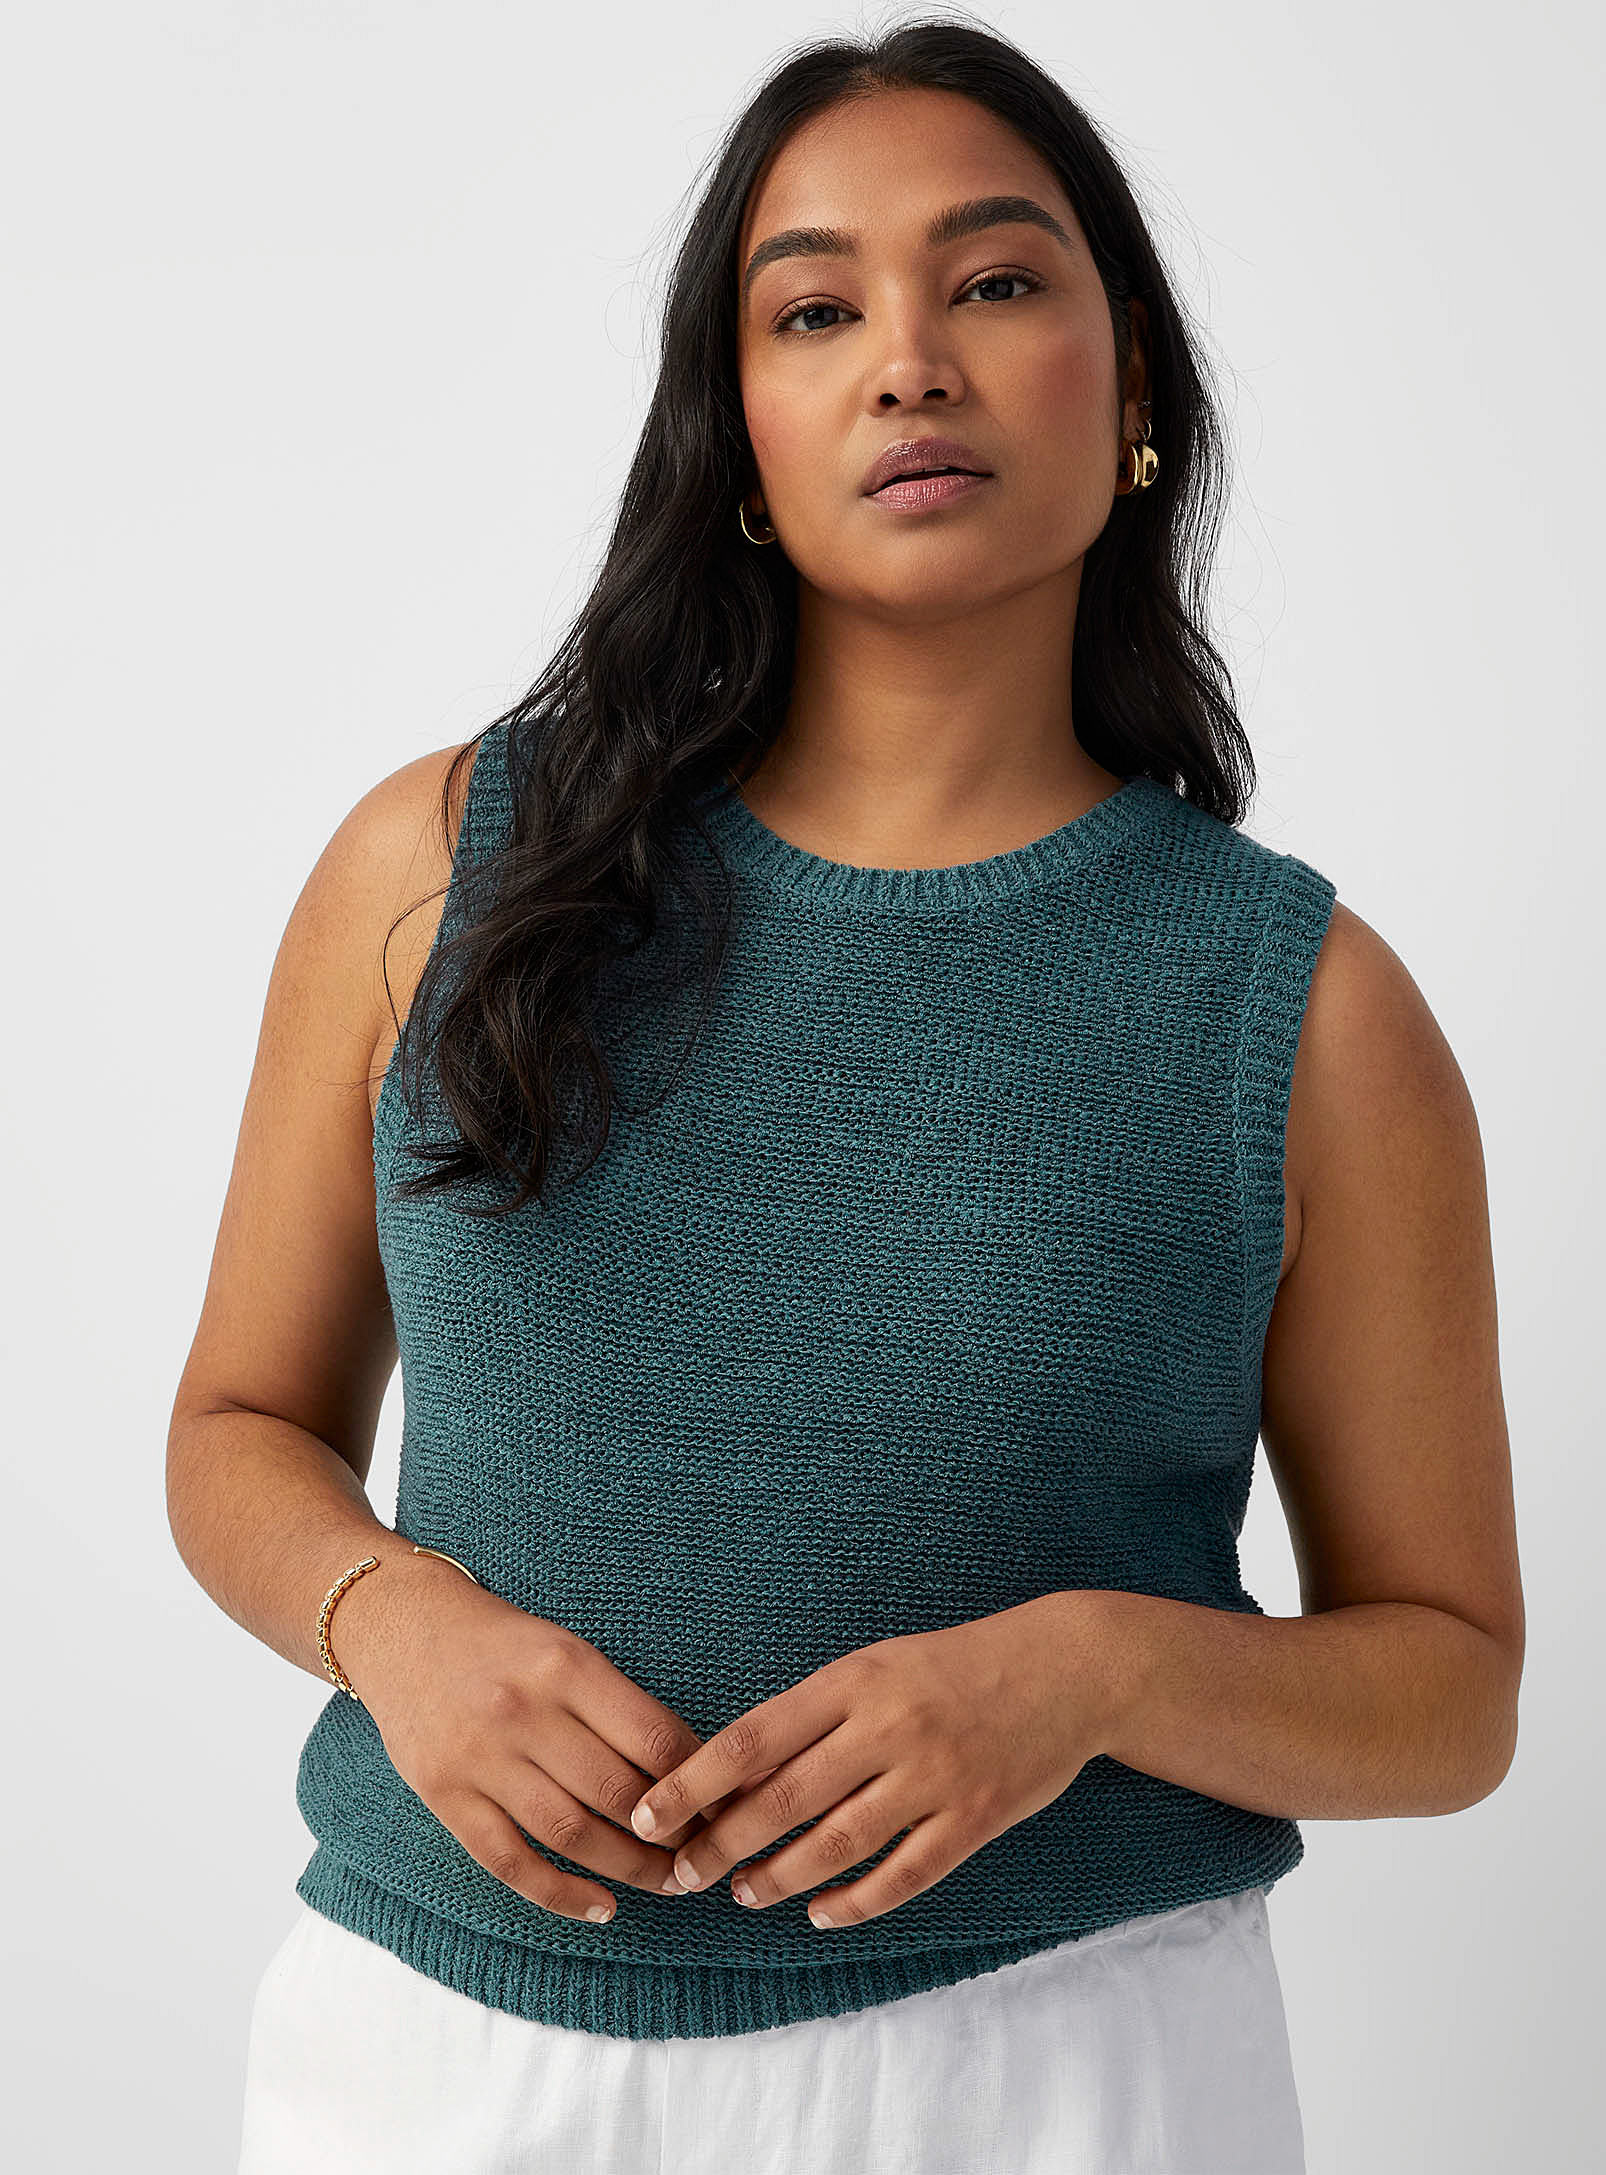 Contemporaine Ribbon Knit Sweater Vest In Teal